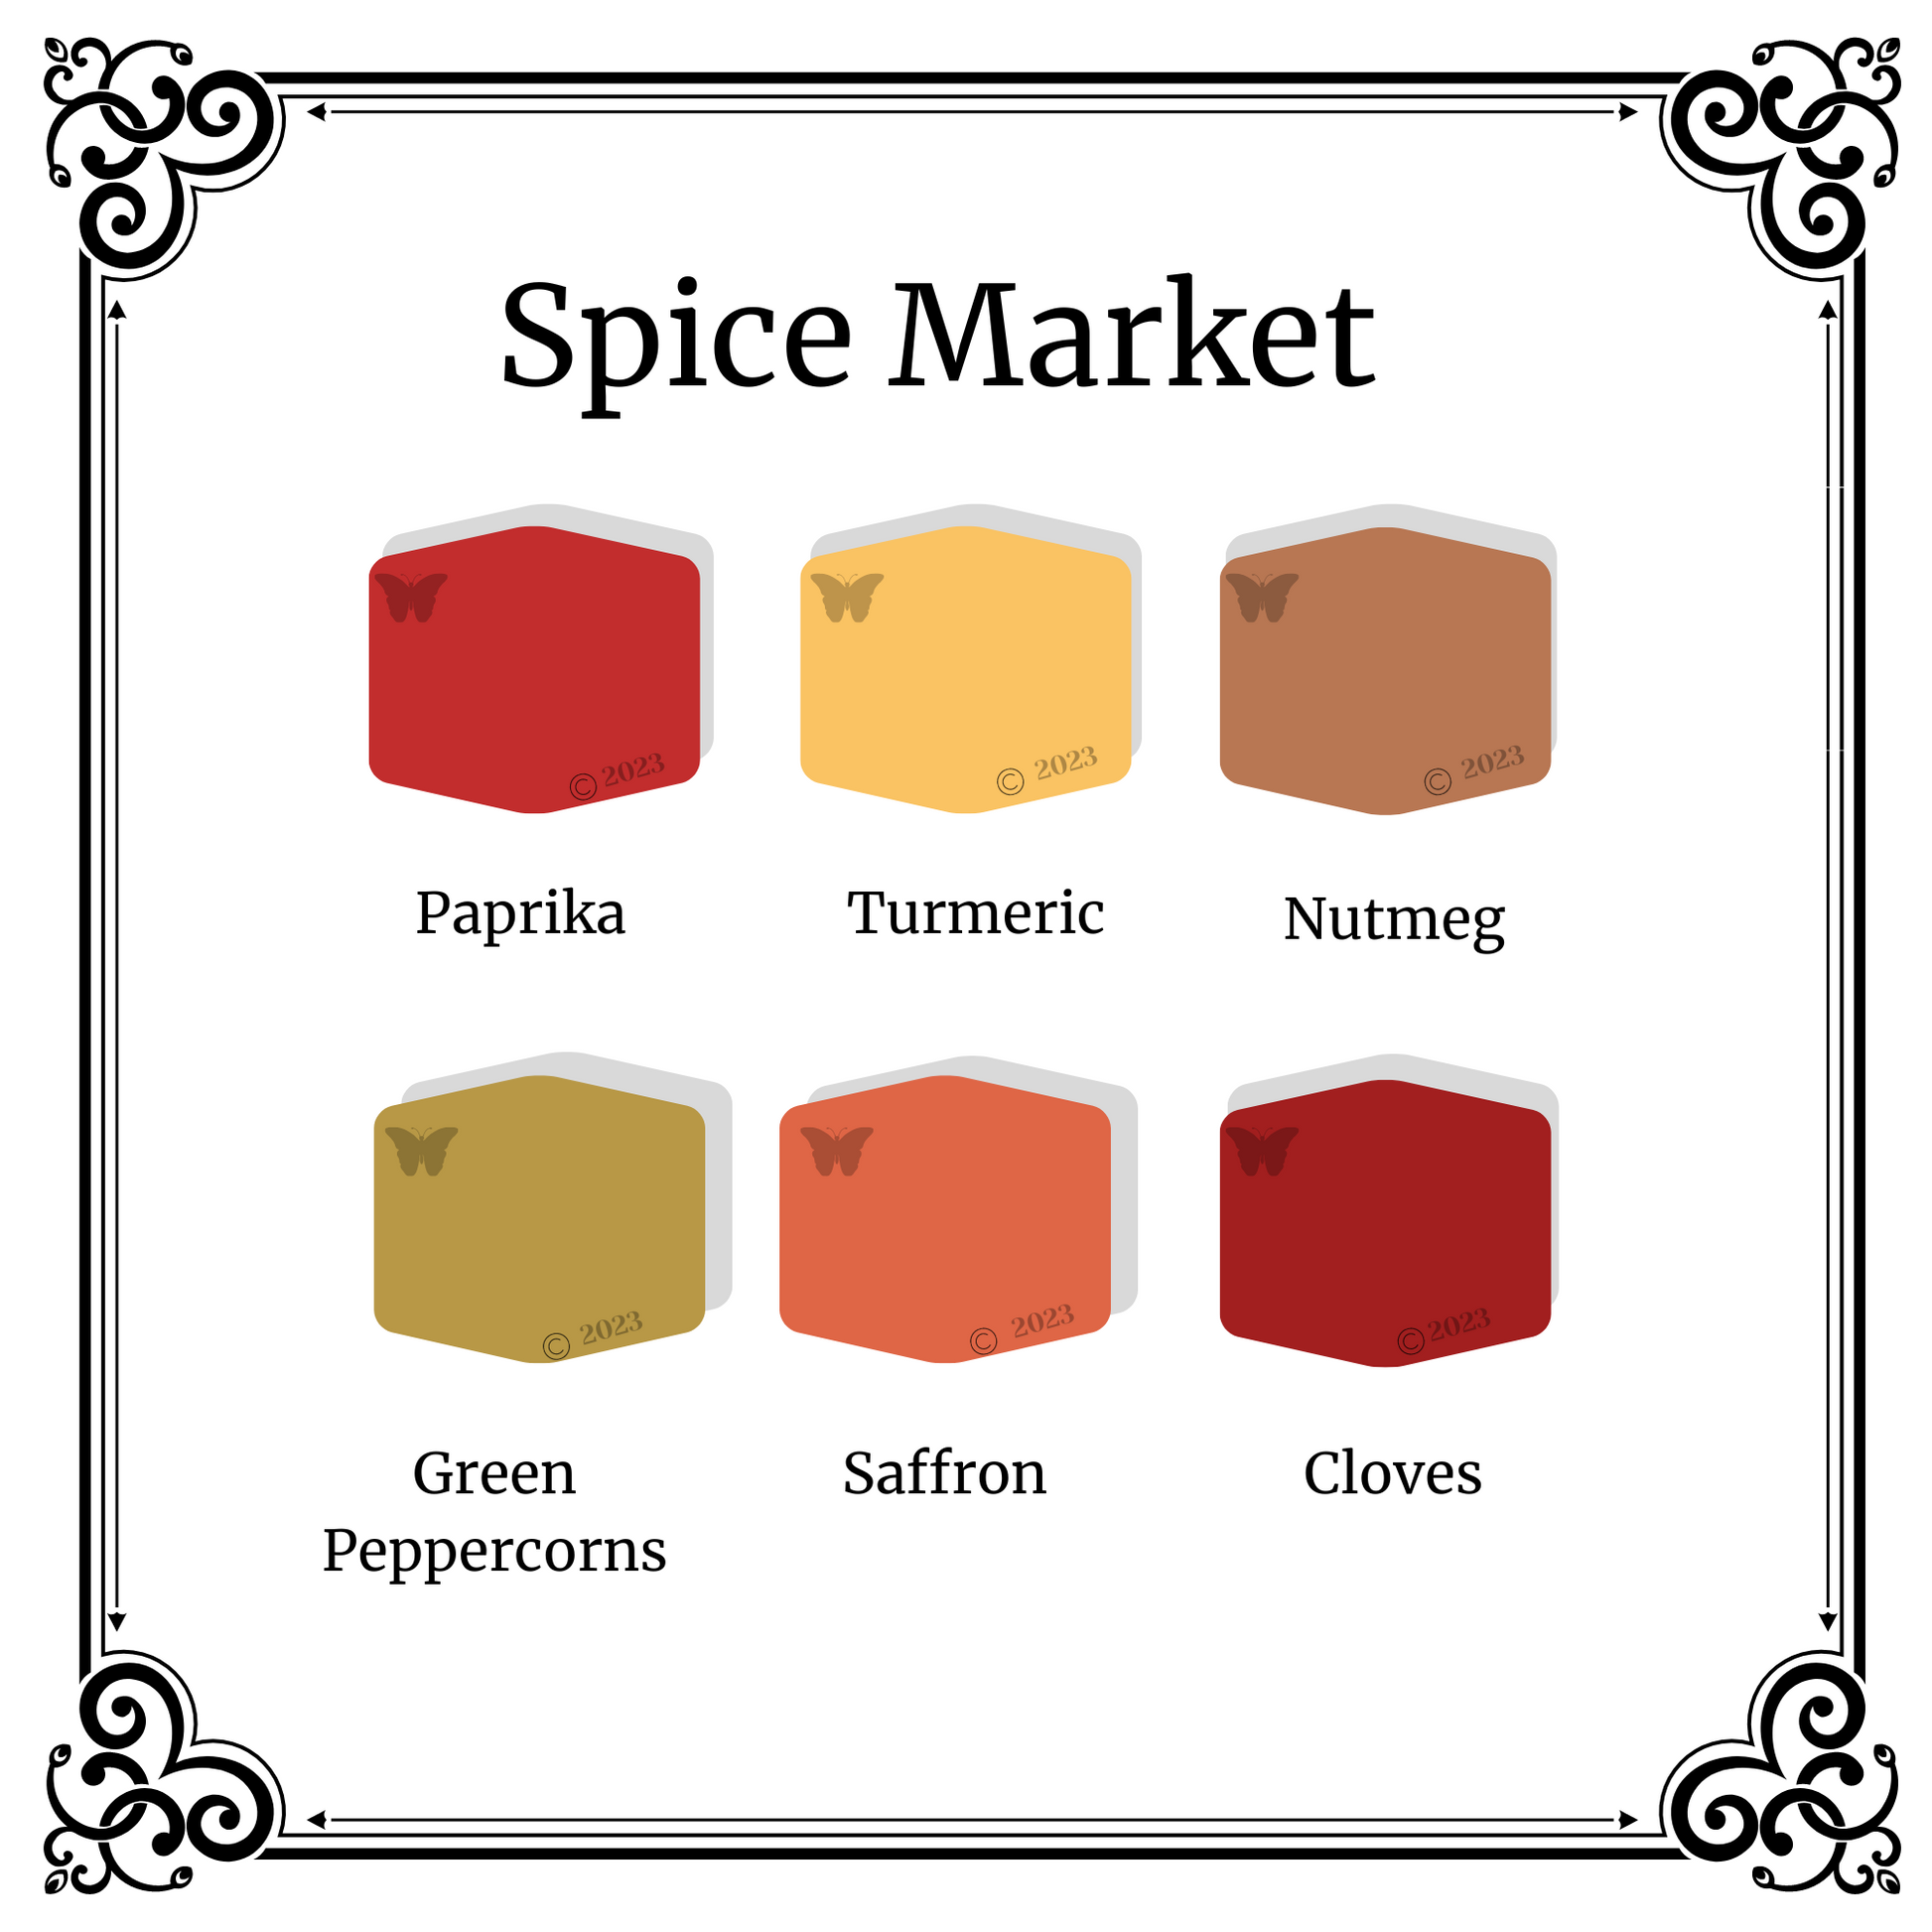 Showing the 6 color palette of Spice Market: Turmeric, Paprika, Green Peppercorns, Clove Saffron and Nutmet